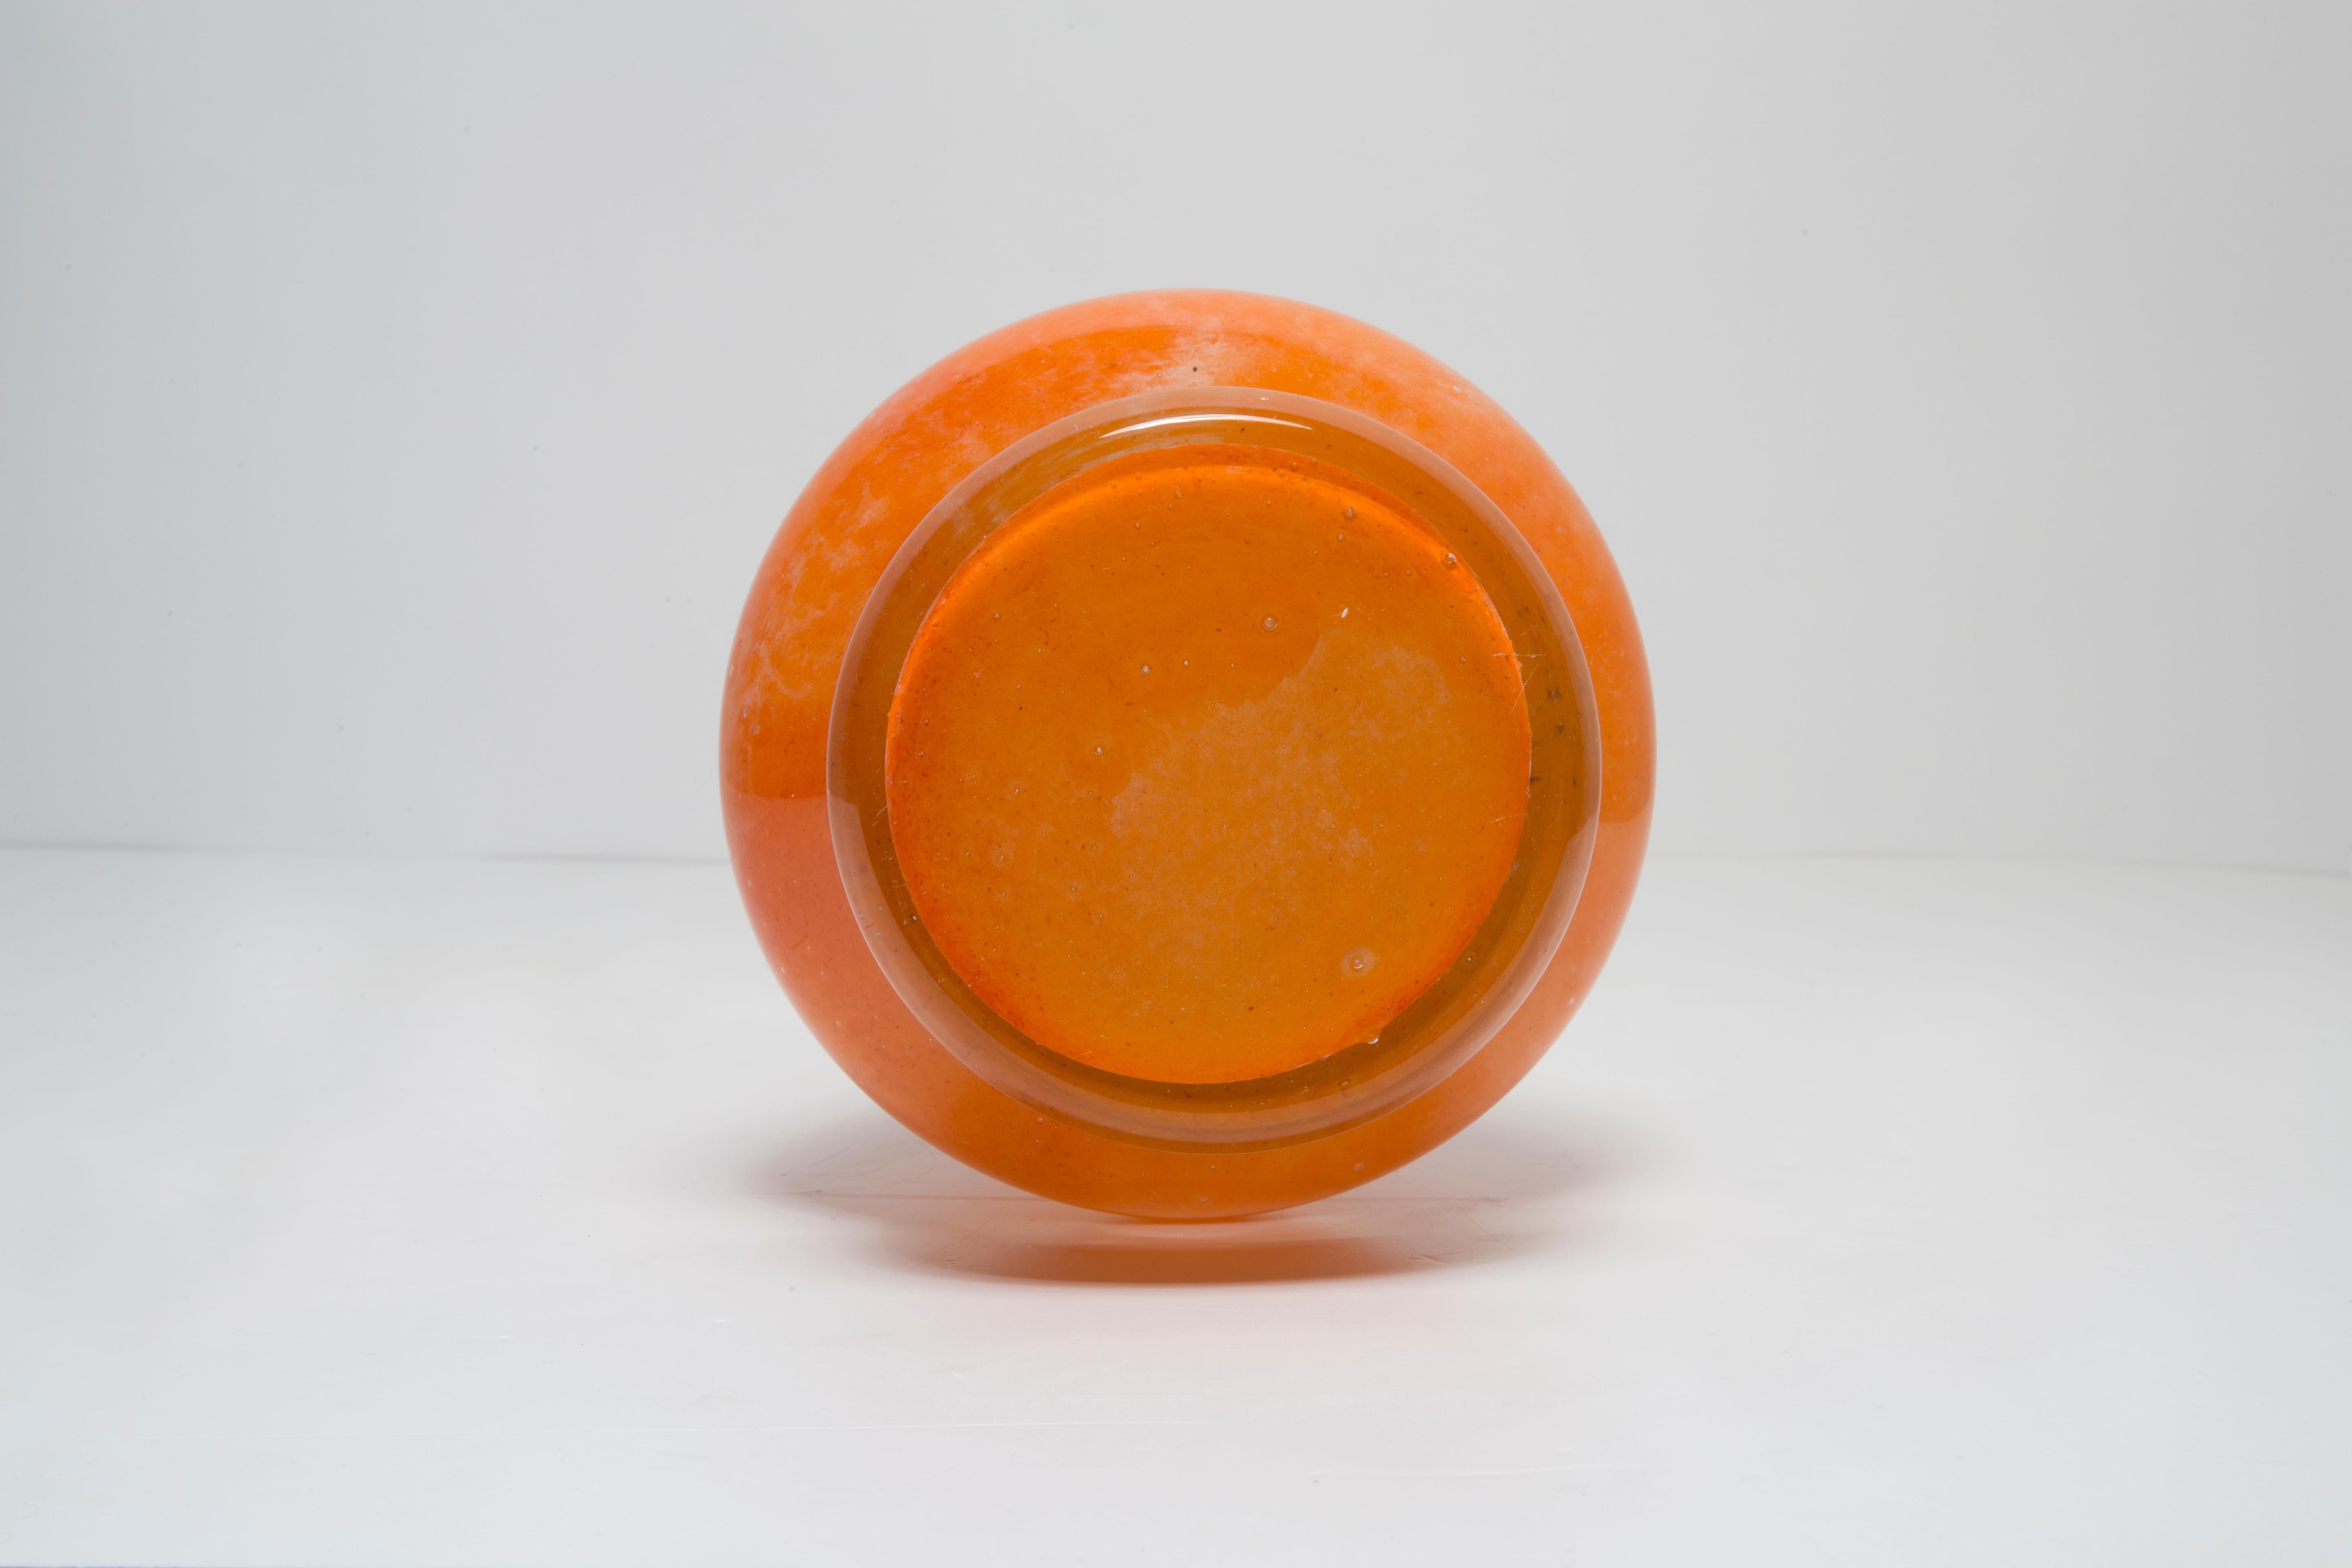 Mid Century Vintage Artistic Glass Orange and White Vase, Europe, 1970s For Sale 2